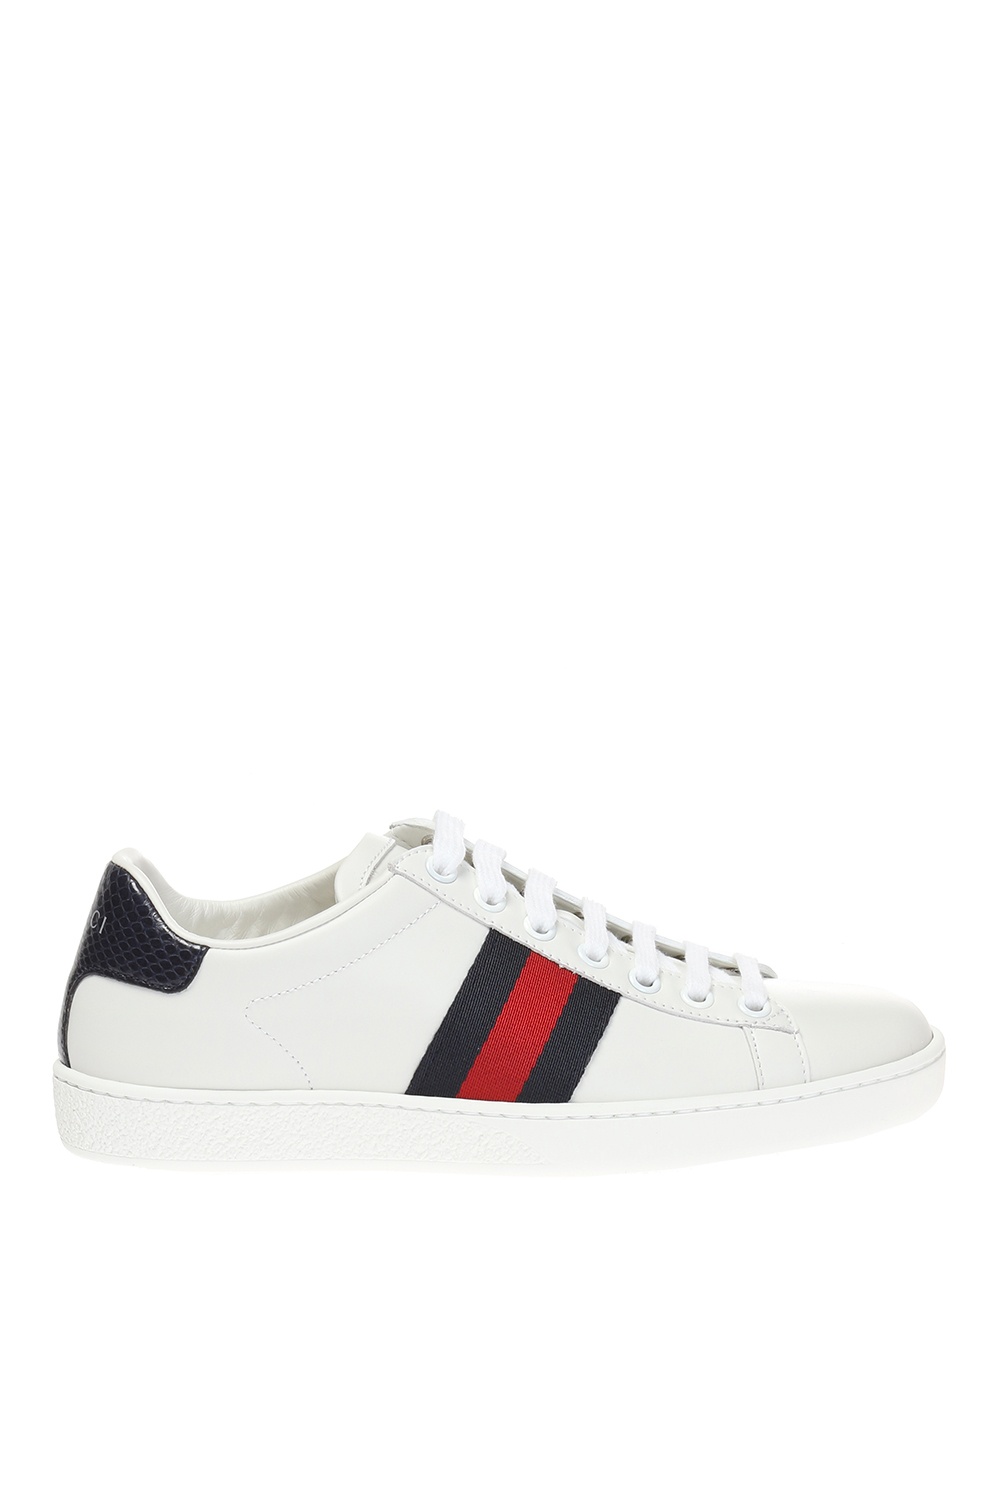 gucci sports shoes